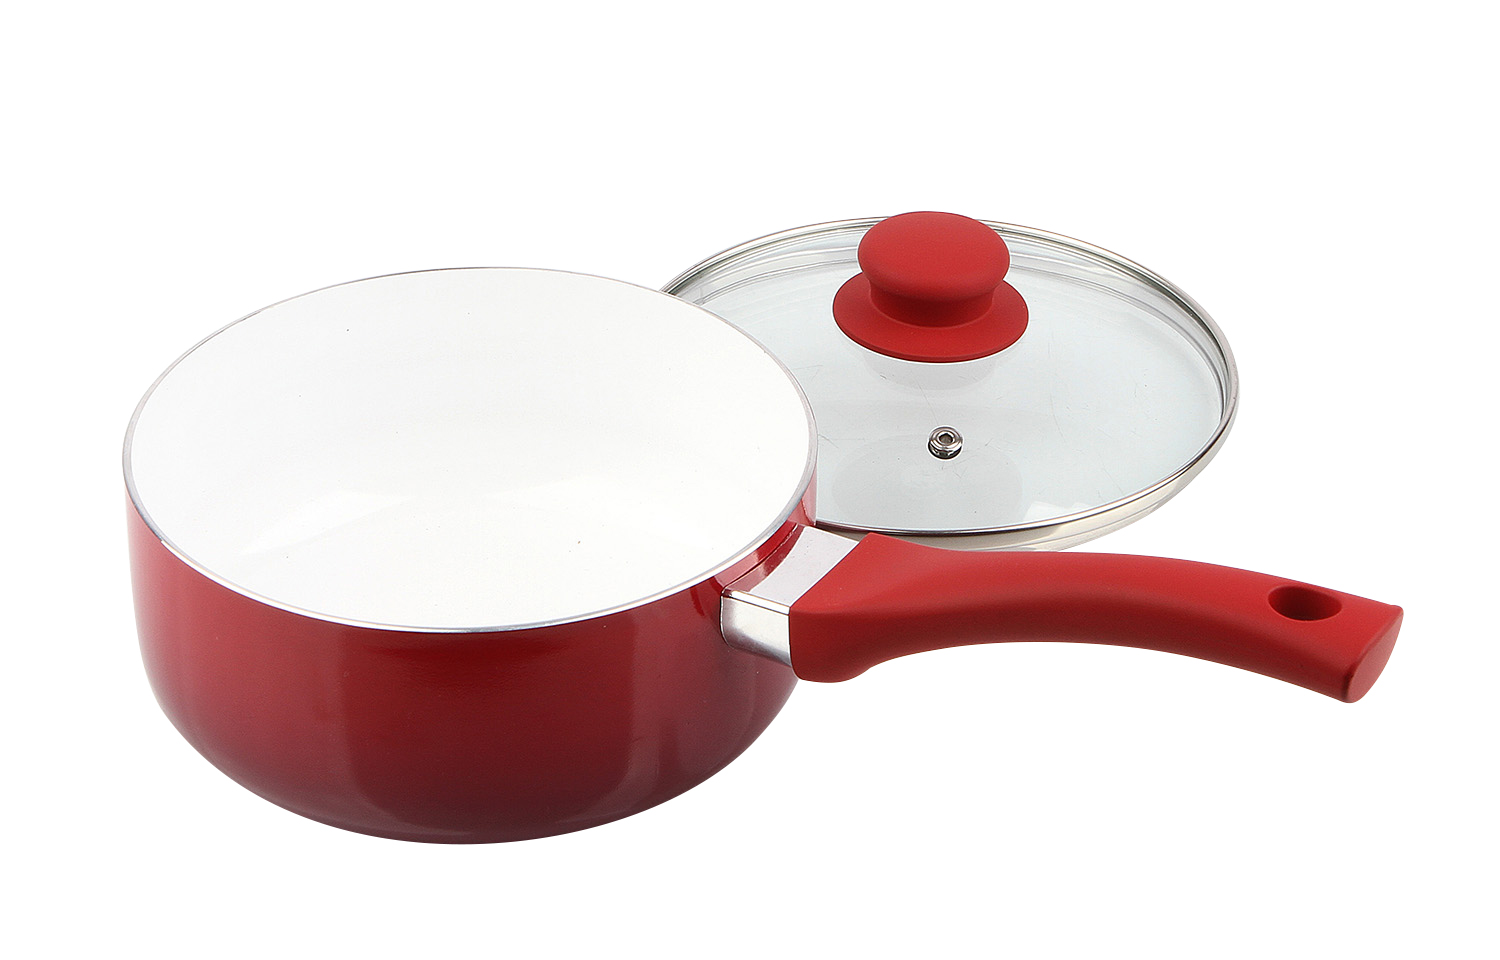 Mainstays Ceramic Nonstick 12 Piece Cookware Set, Red Ombre - image 5 of 8